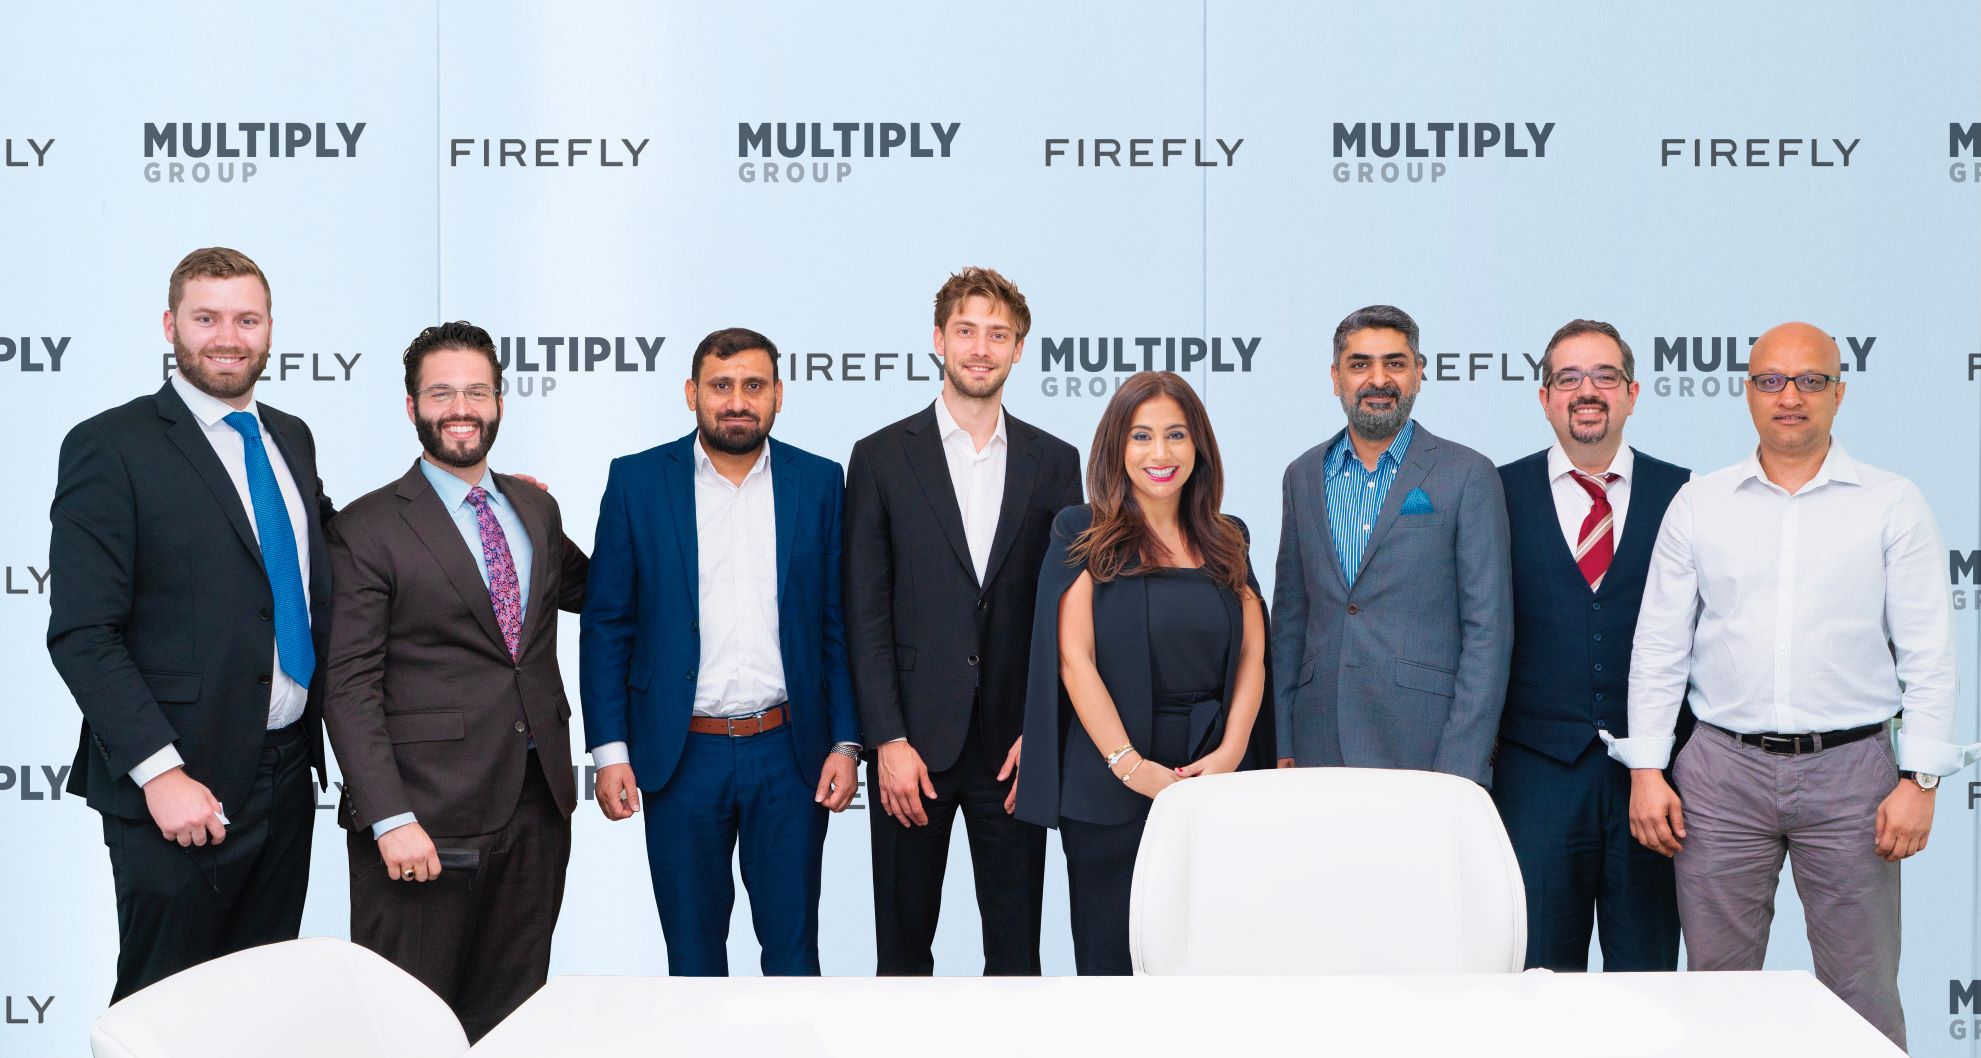 Abu Dhabi’s Multiply Group Invests Further AED55million in Firefly to Bring Digital Advertising Services to Taxis and Rideshares in MENA